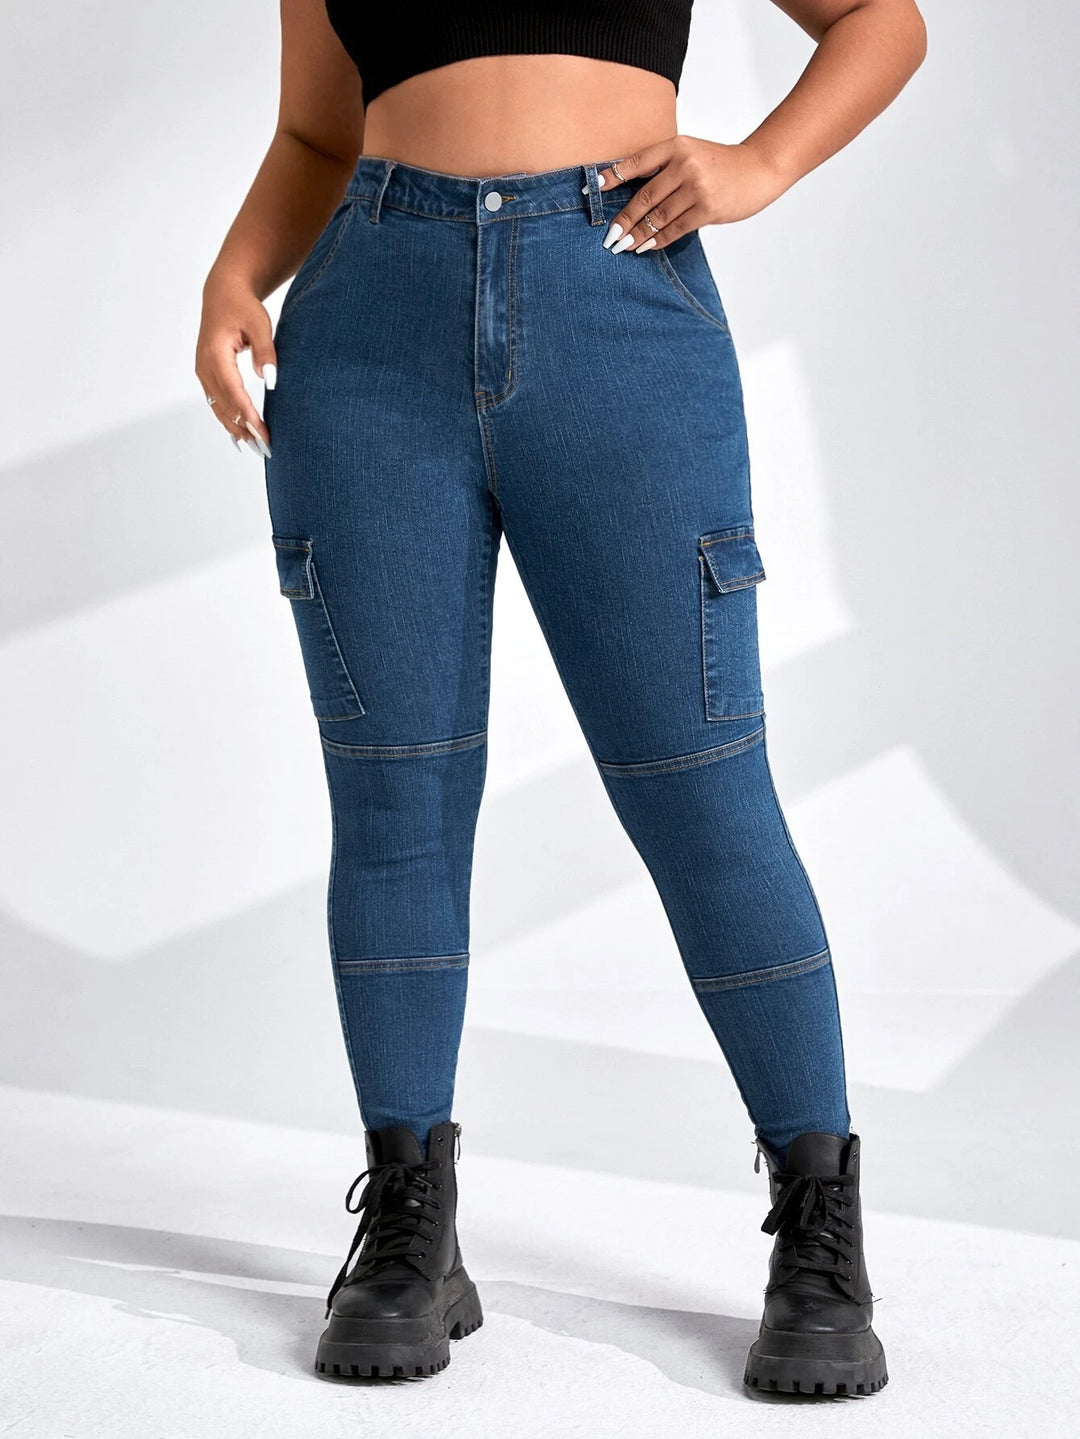 Cargo Jeans With Pockets For Plus Sizes